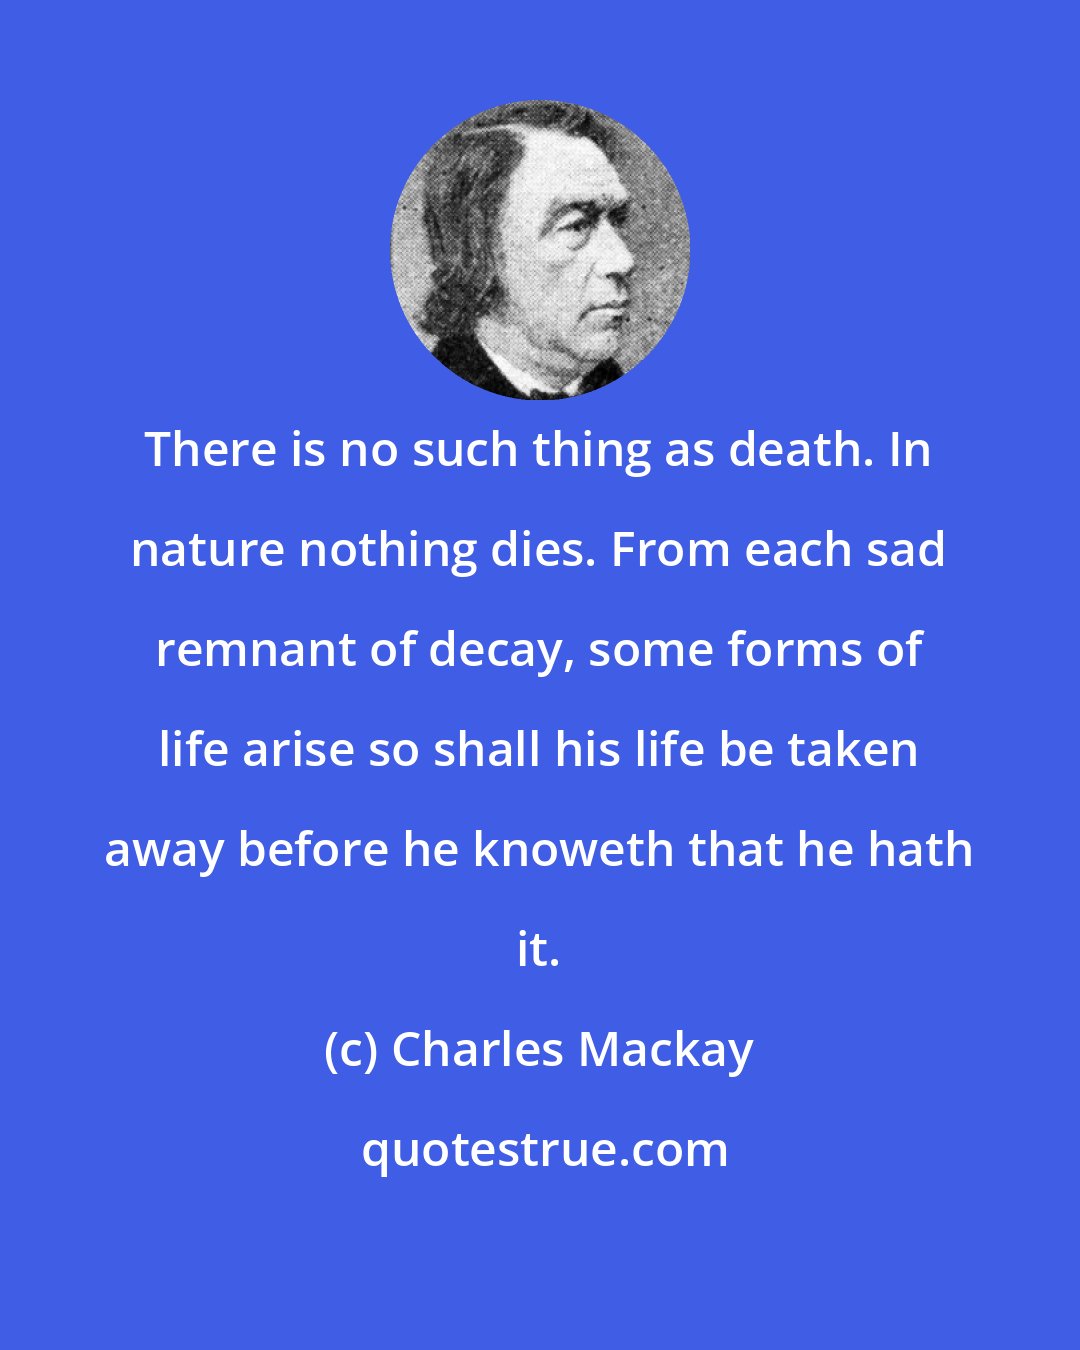 Charles Mackay: There is no such thing as death. In nature nothing dies. From each sad remnant of decay, some forms of life arise so shall his life be taken away before he knoweth that he hath it.